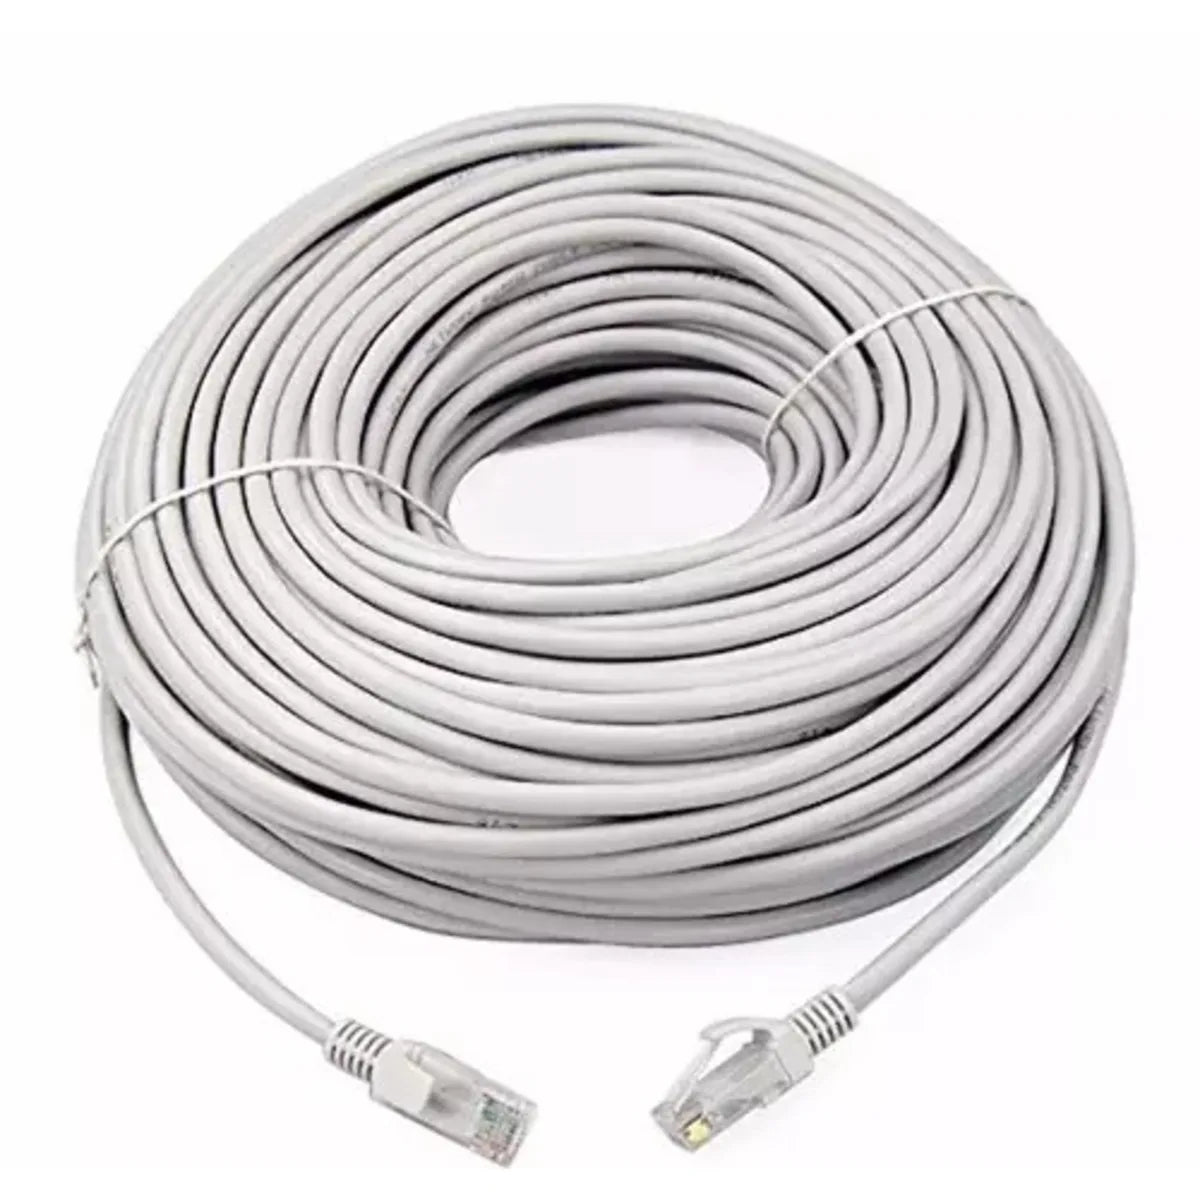 Kuwes Network Cable 20 mtr